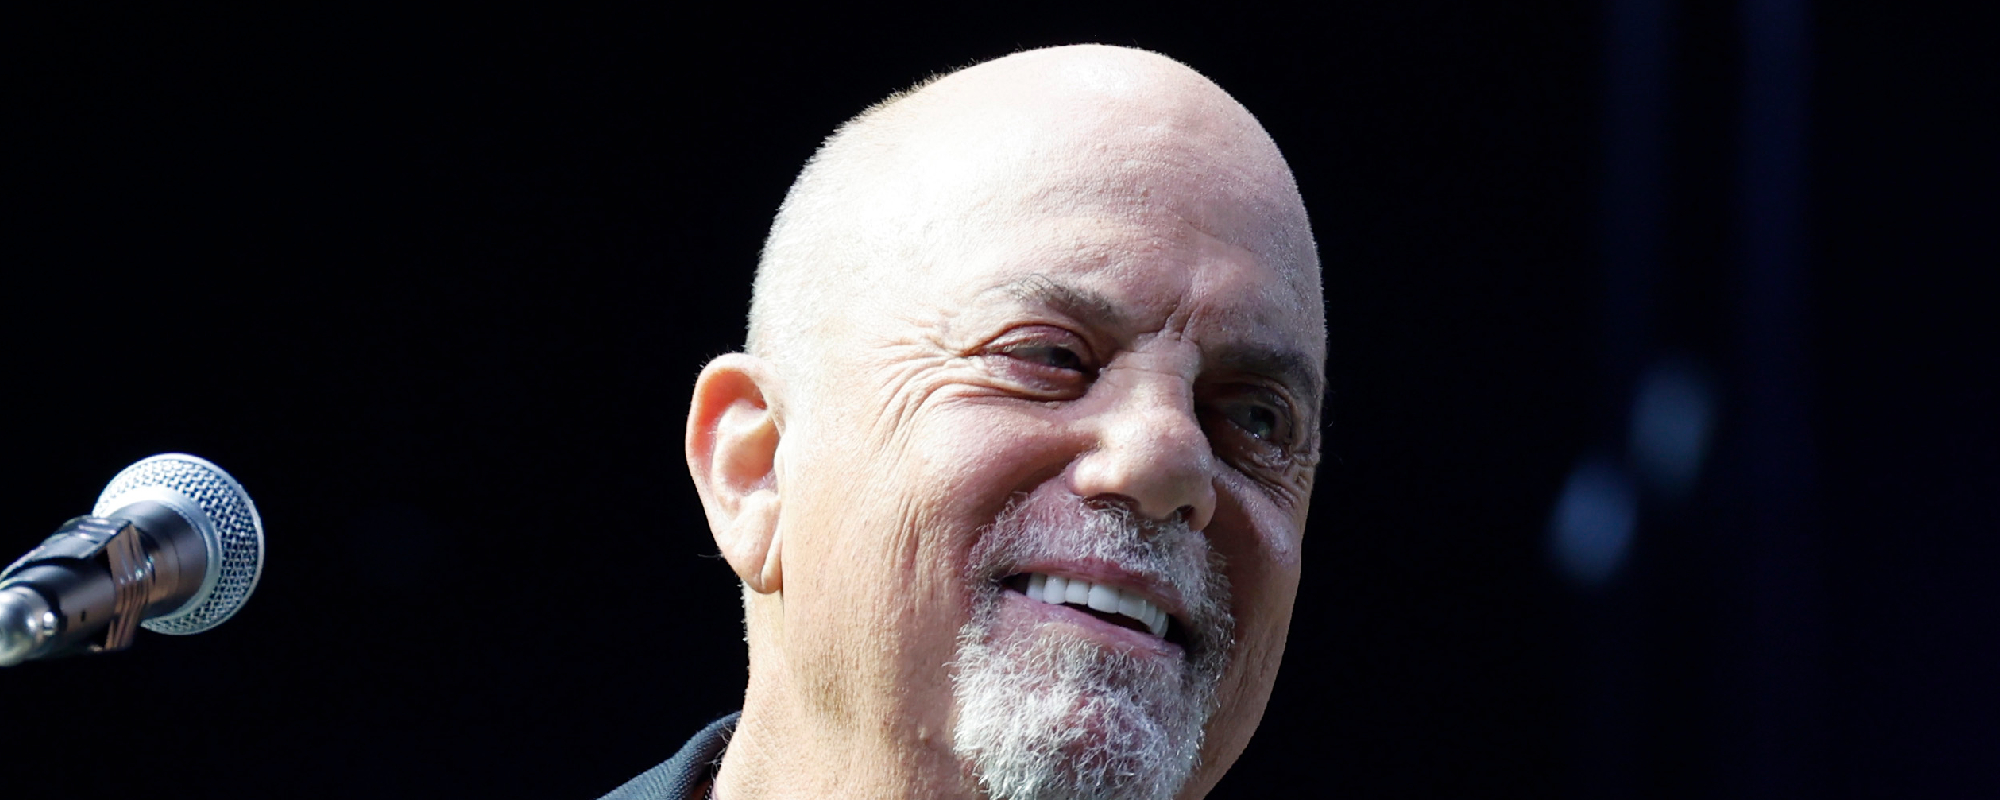 Billy Joel Reveals Why Songwriting Became “Torment” for Him